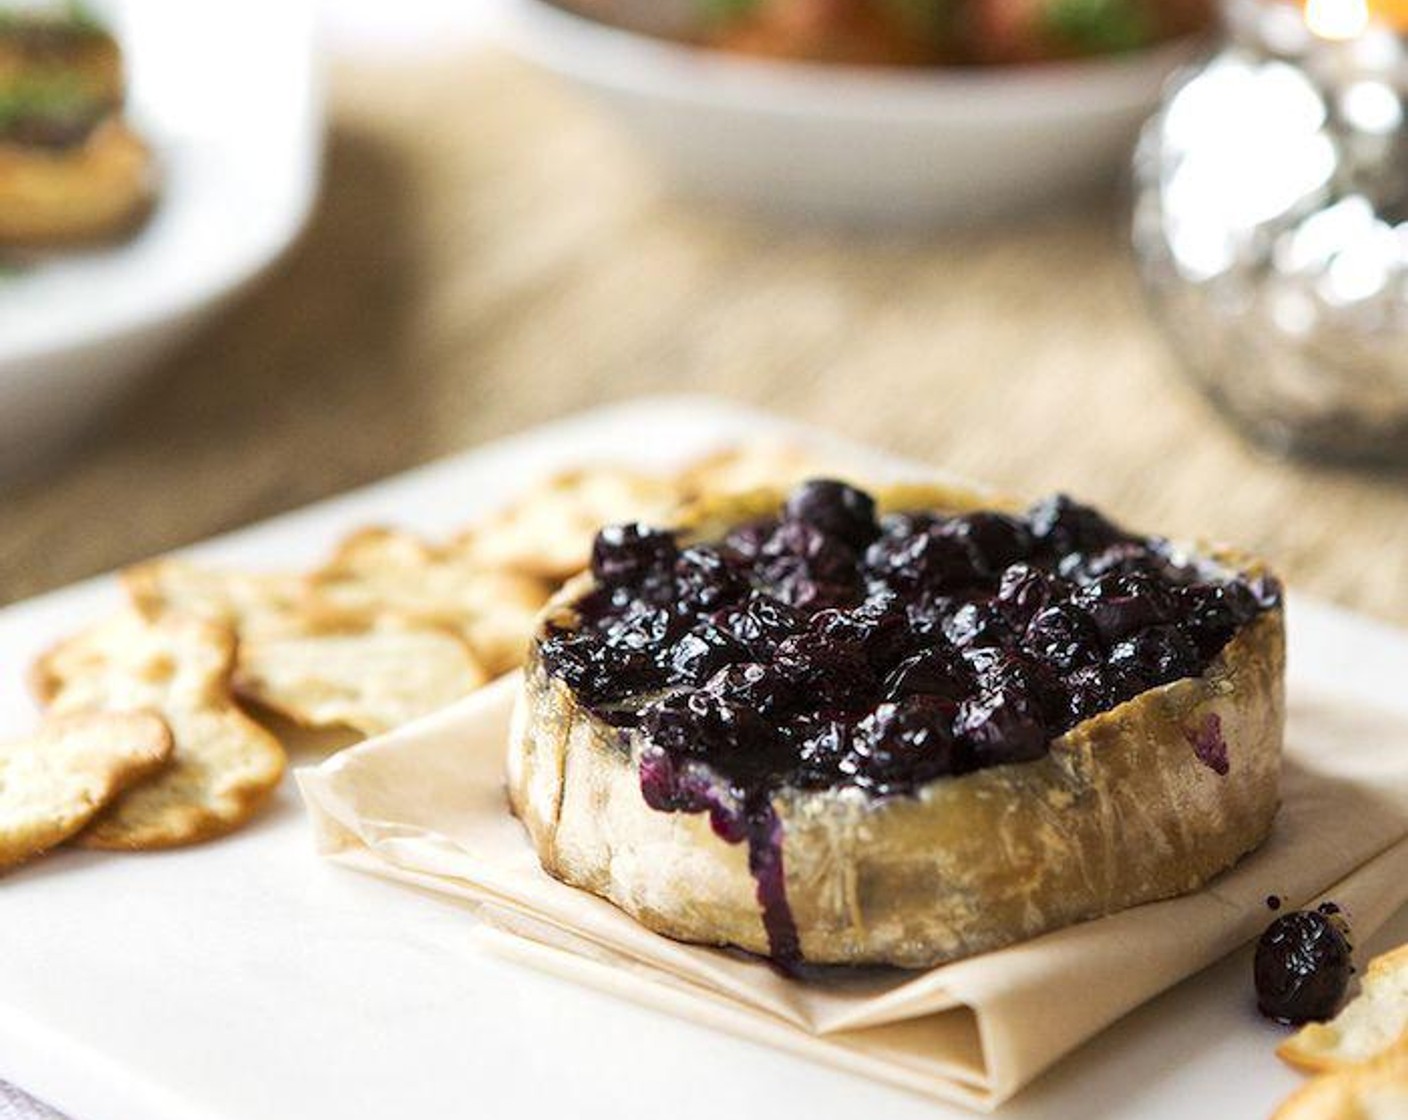 step 5 Carefully place brie to a serving platter and top with blueberry reduction. Serve with your favorite Crackers (to taste). Enjoy!